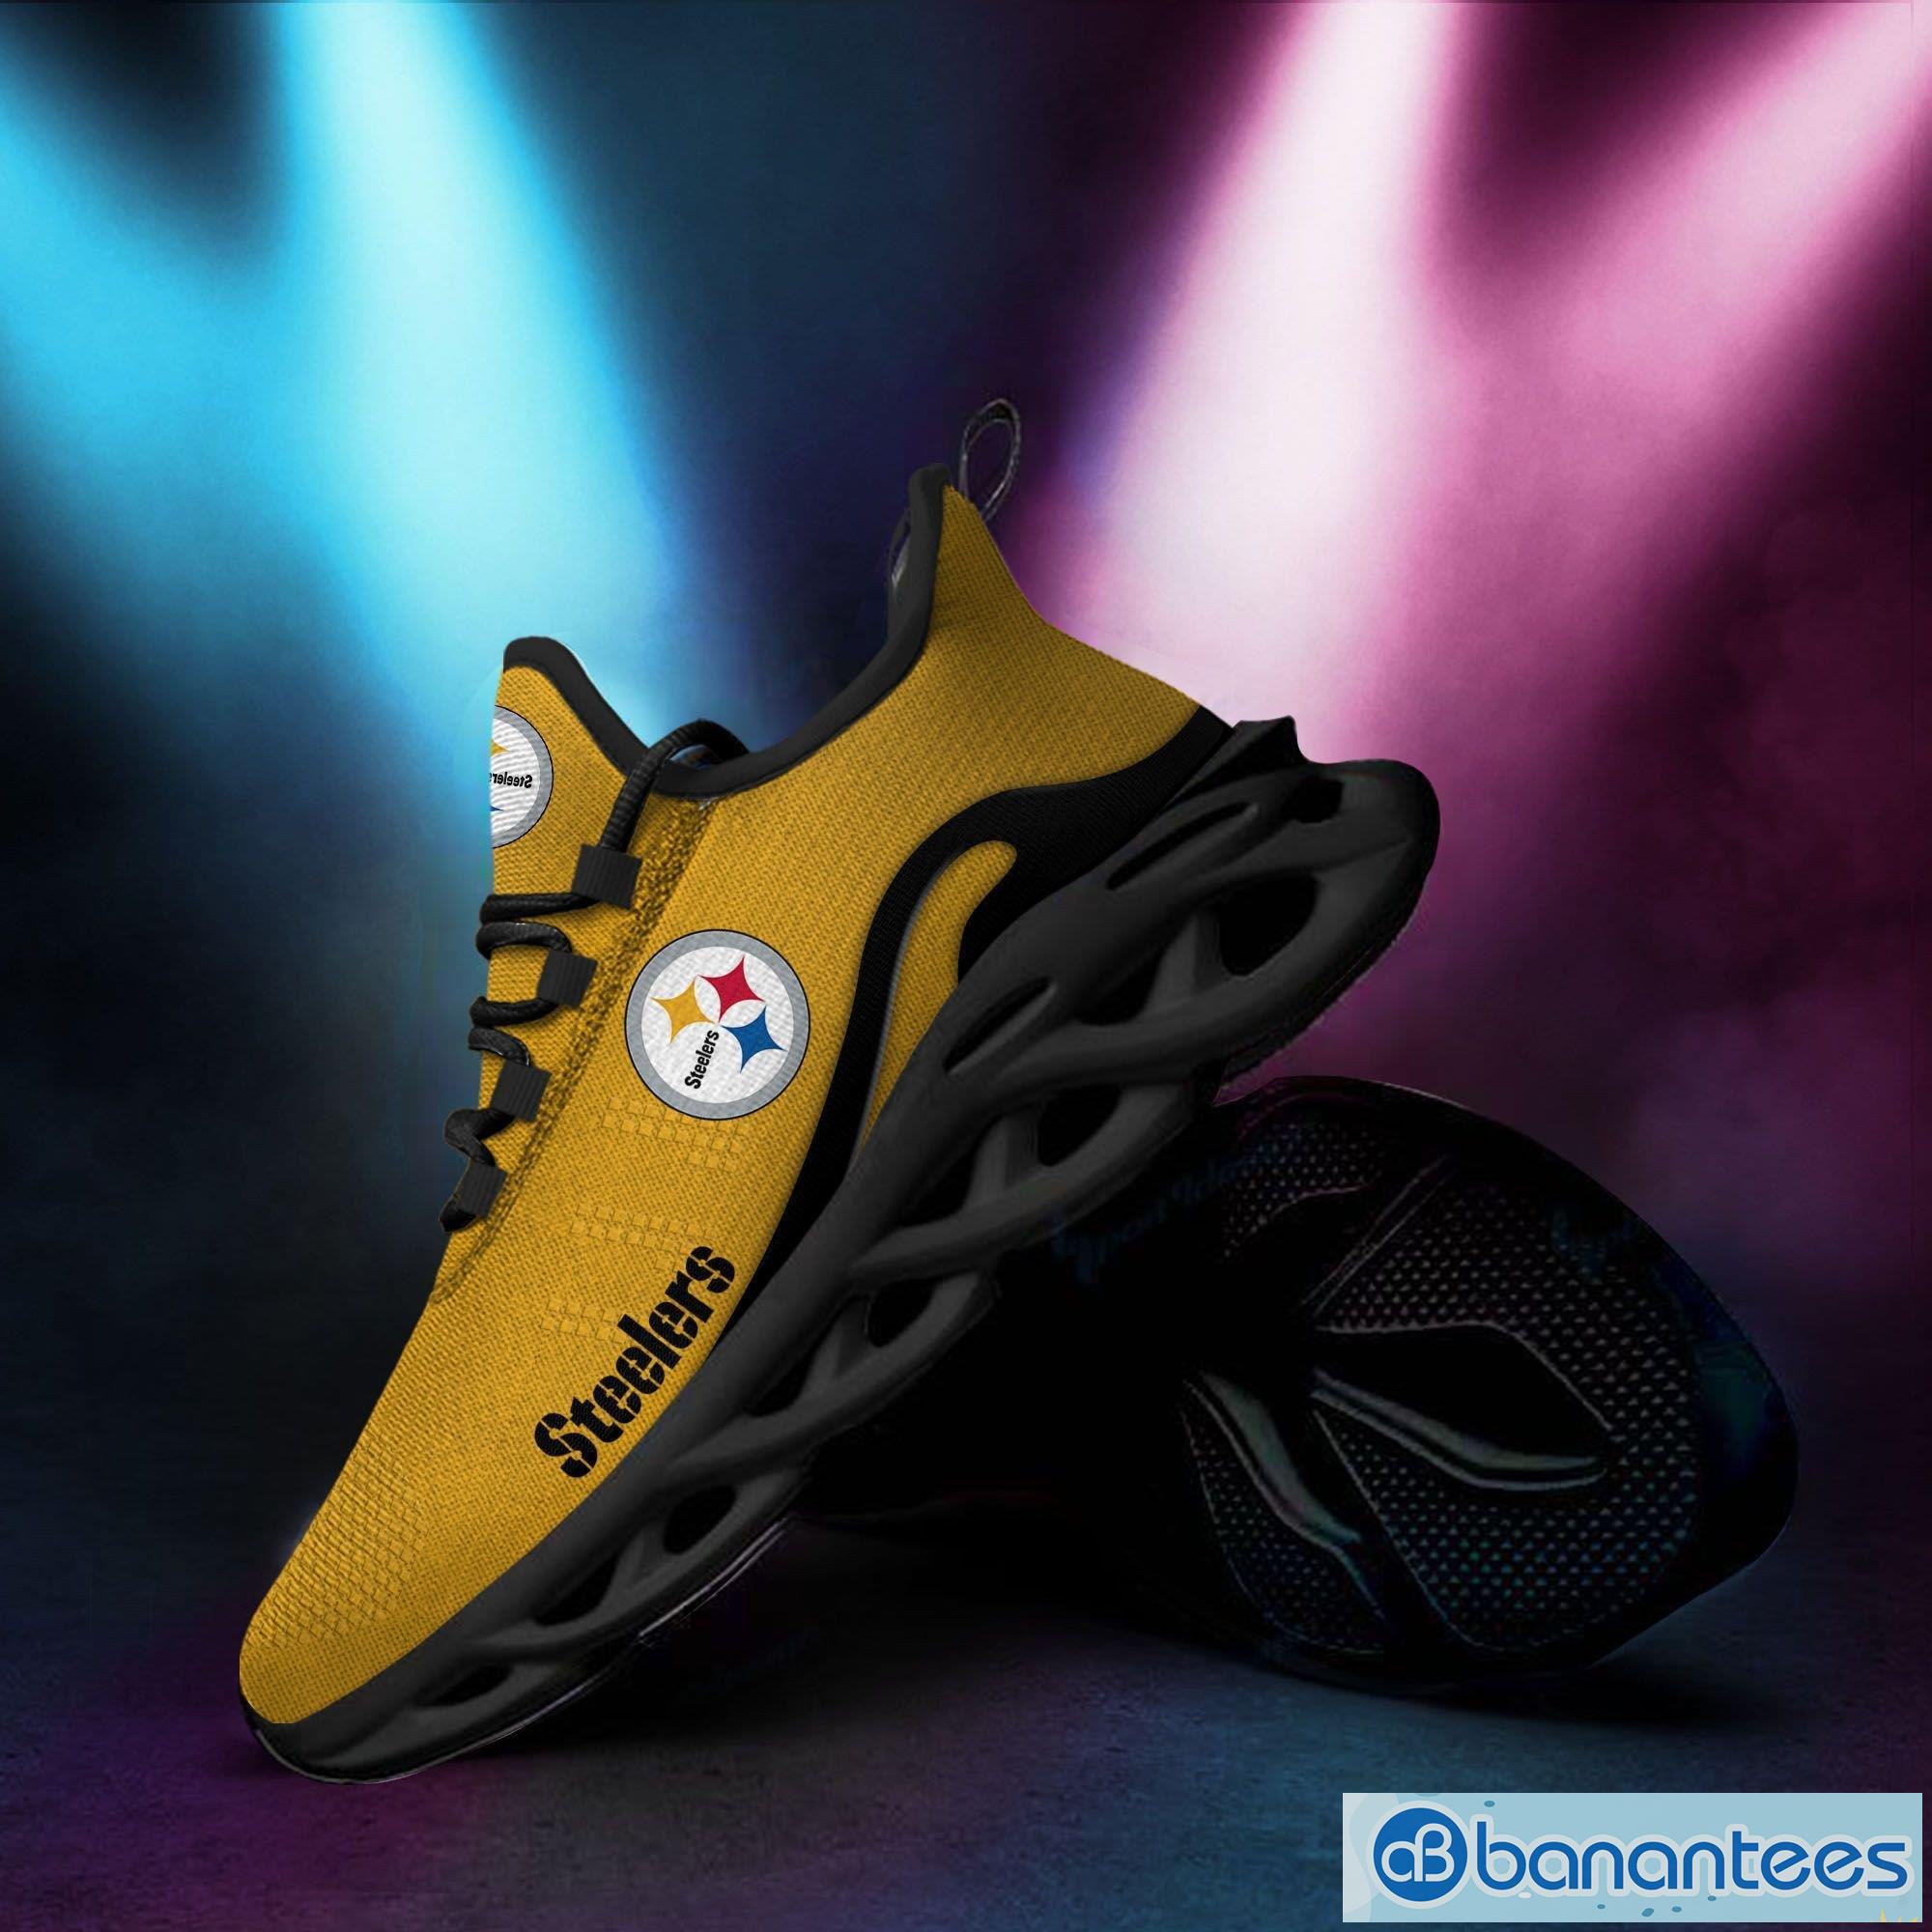 pittsburgh steelers women's tennis shoes